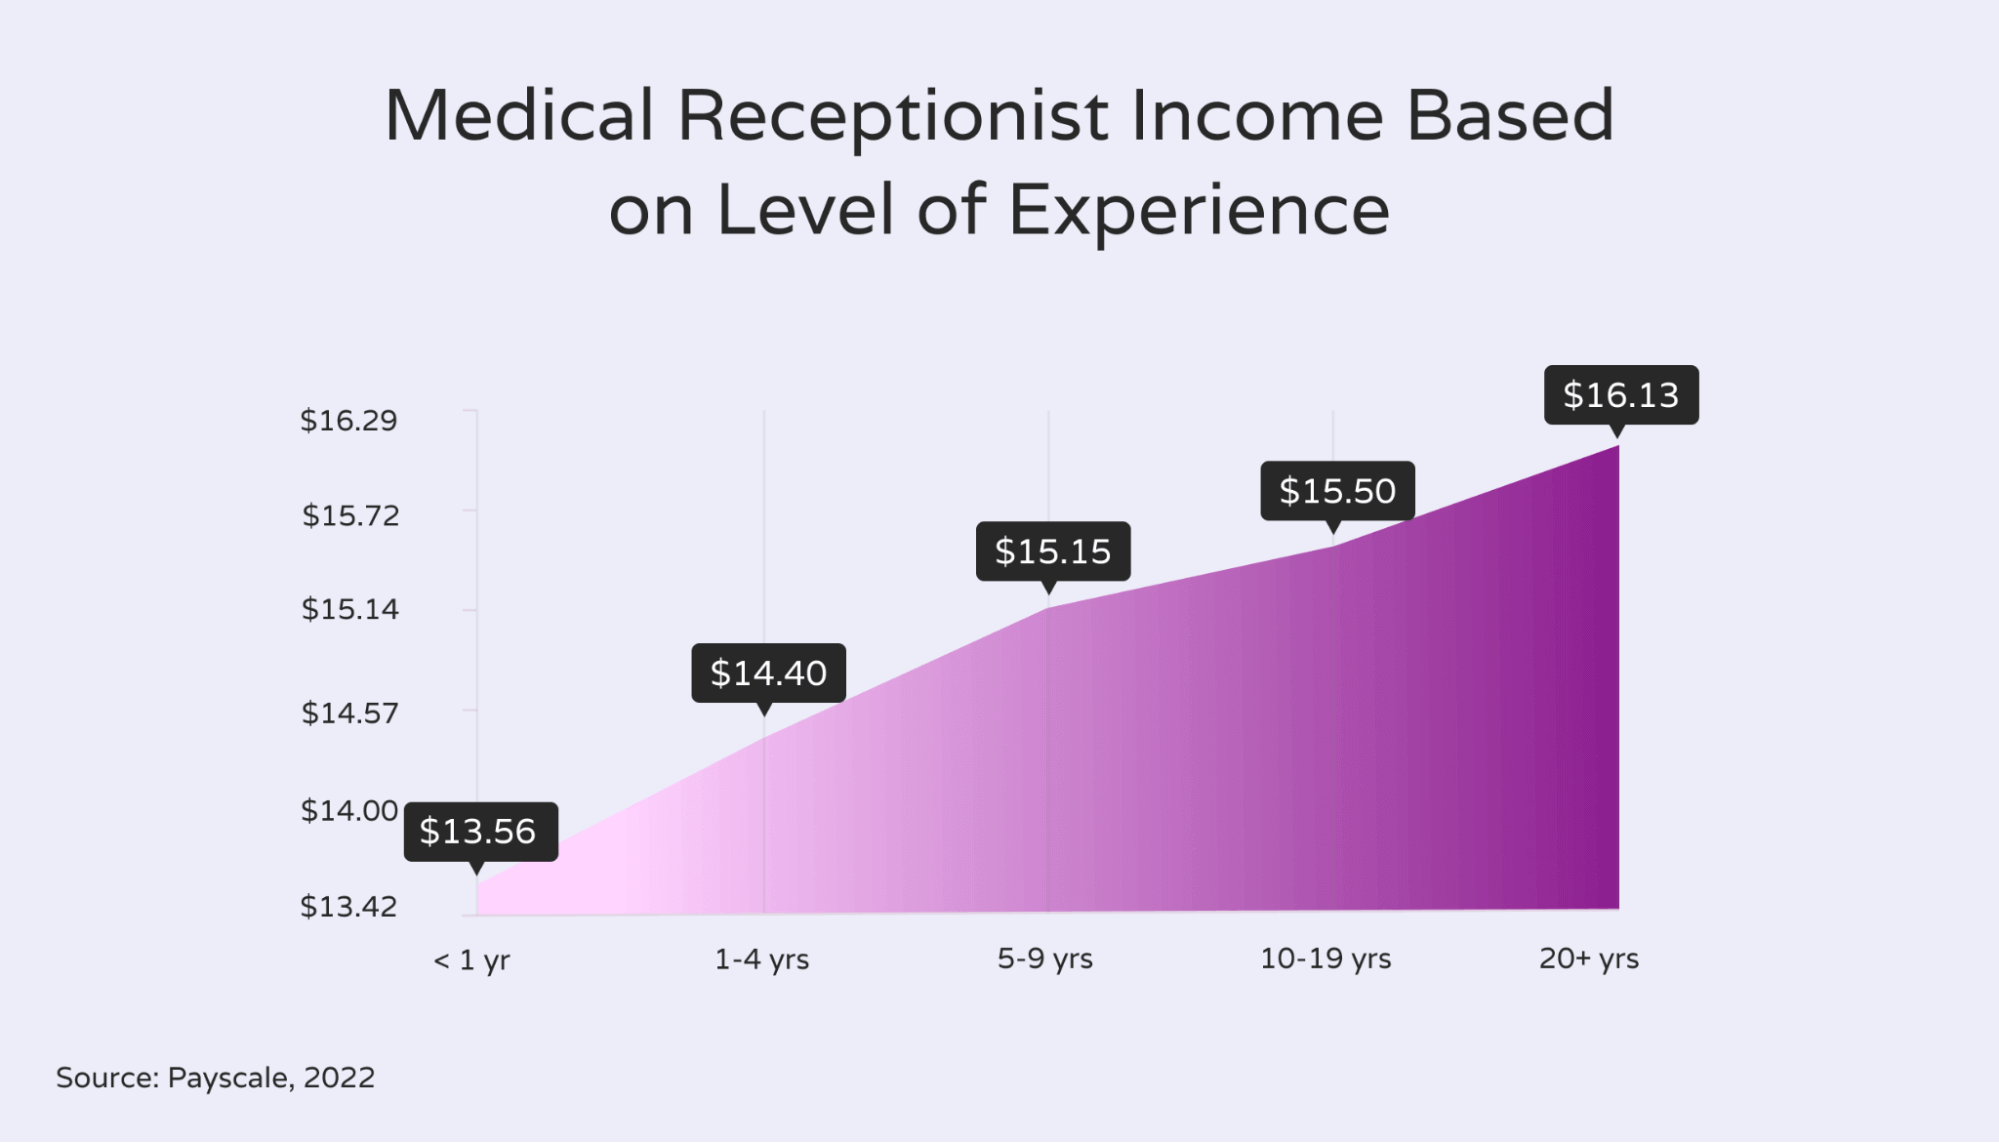 Graph showing medical receptionist income based on level of experience